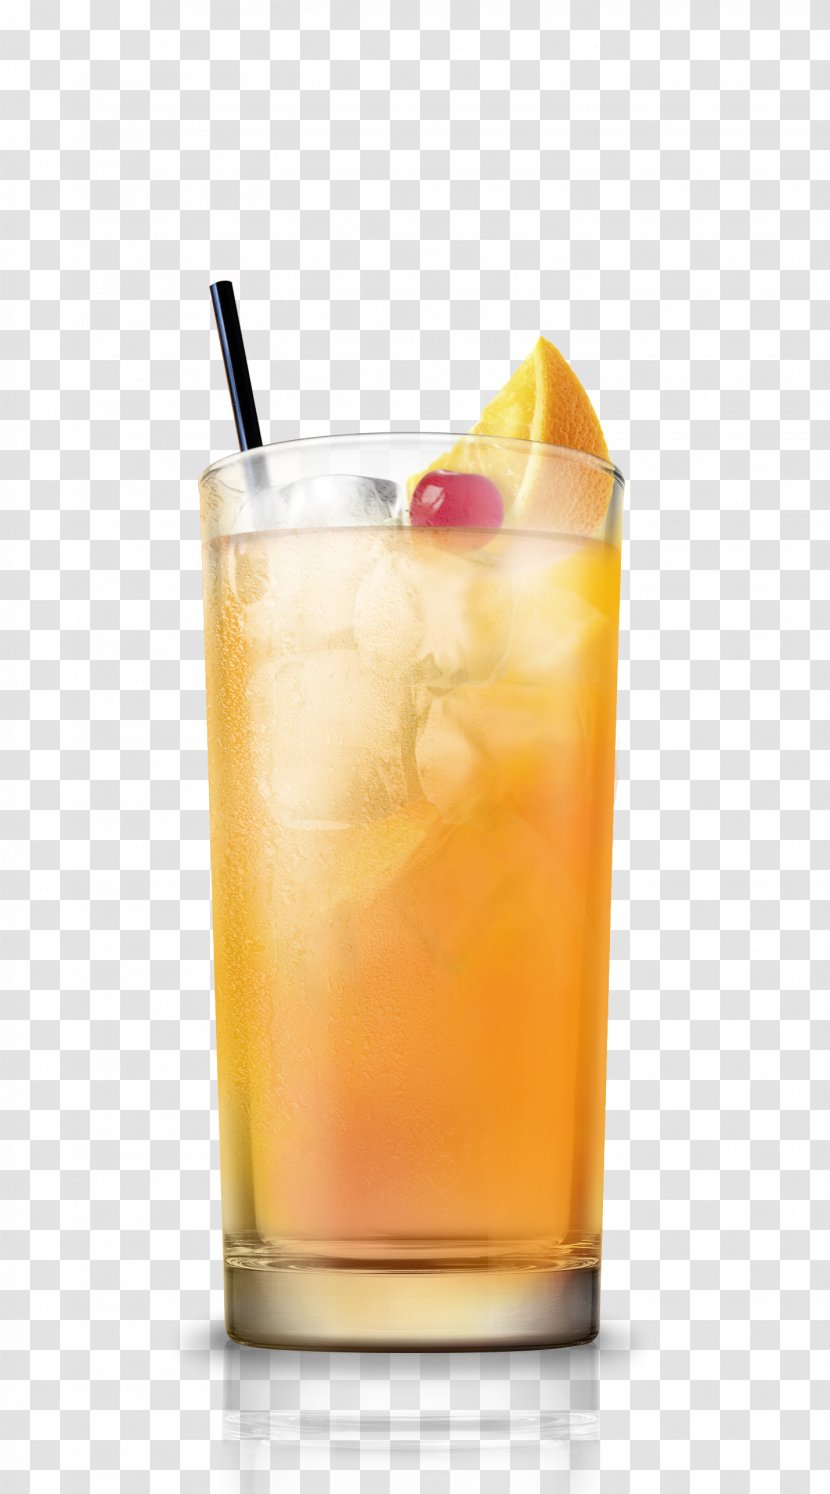 Drink Rum Swizzle Alcoholic Beverage Non-alcoholic Juice - Distilled Fuzzy Navel Transparent PNG